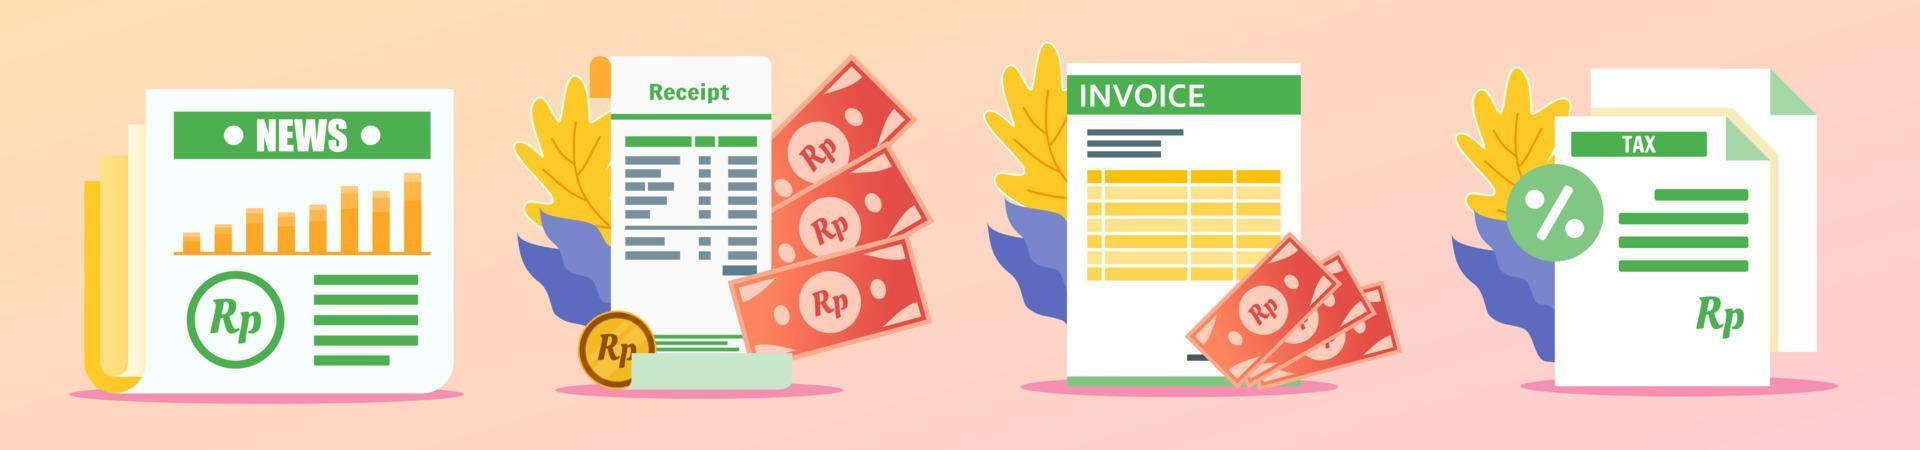 Indonesian Rupiah Receipt and Documents Illustration vector